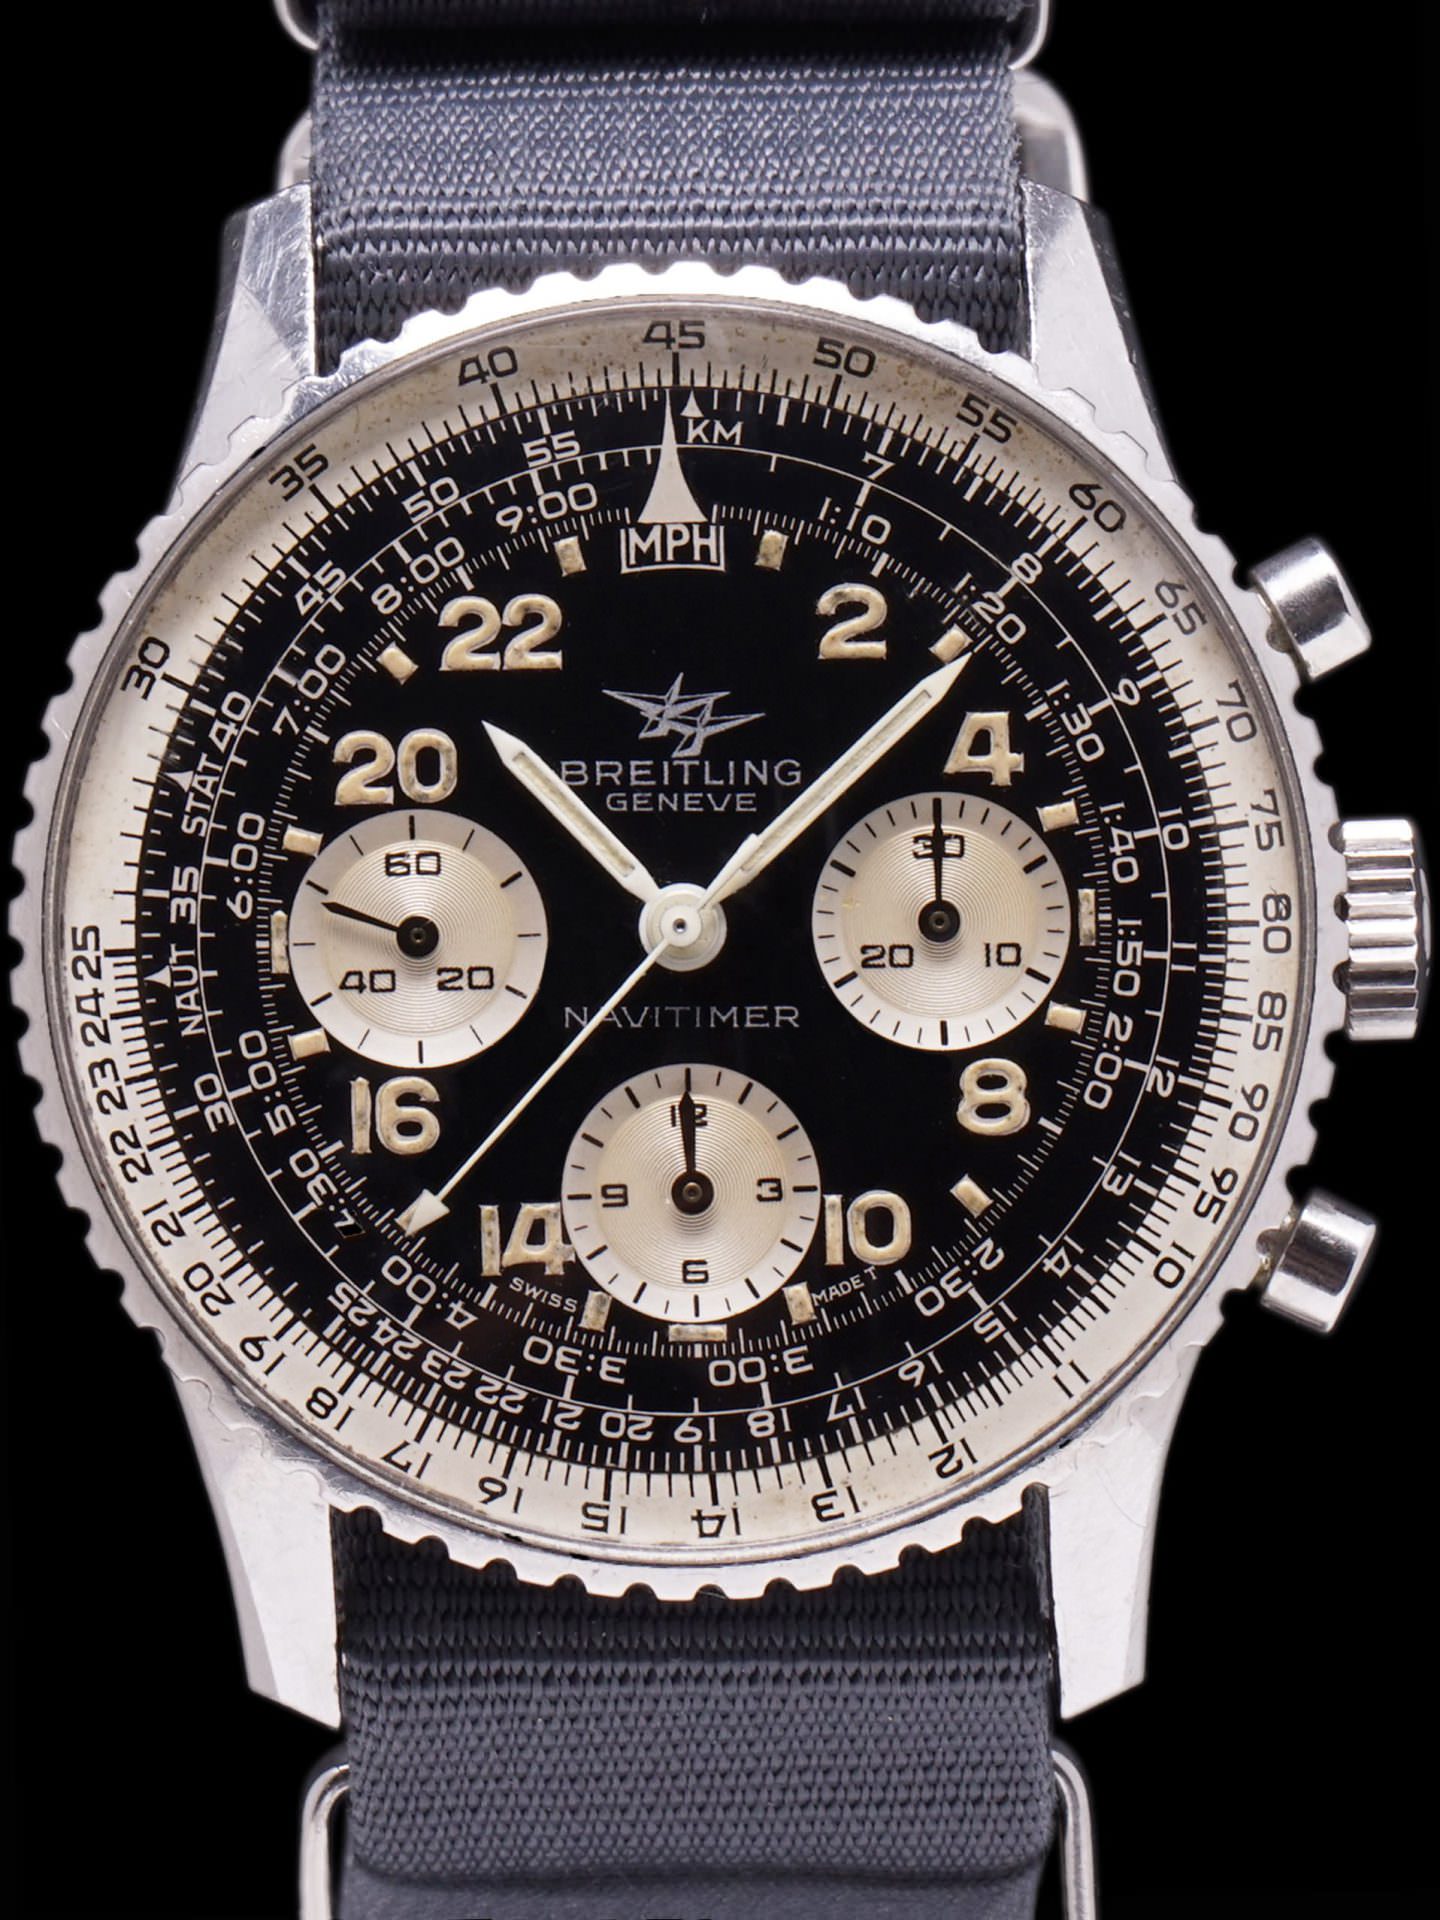 How to Use the Breitling Navitimer Bezel – Craft + Tailored